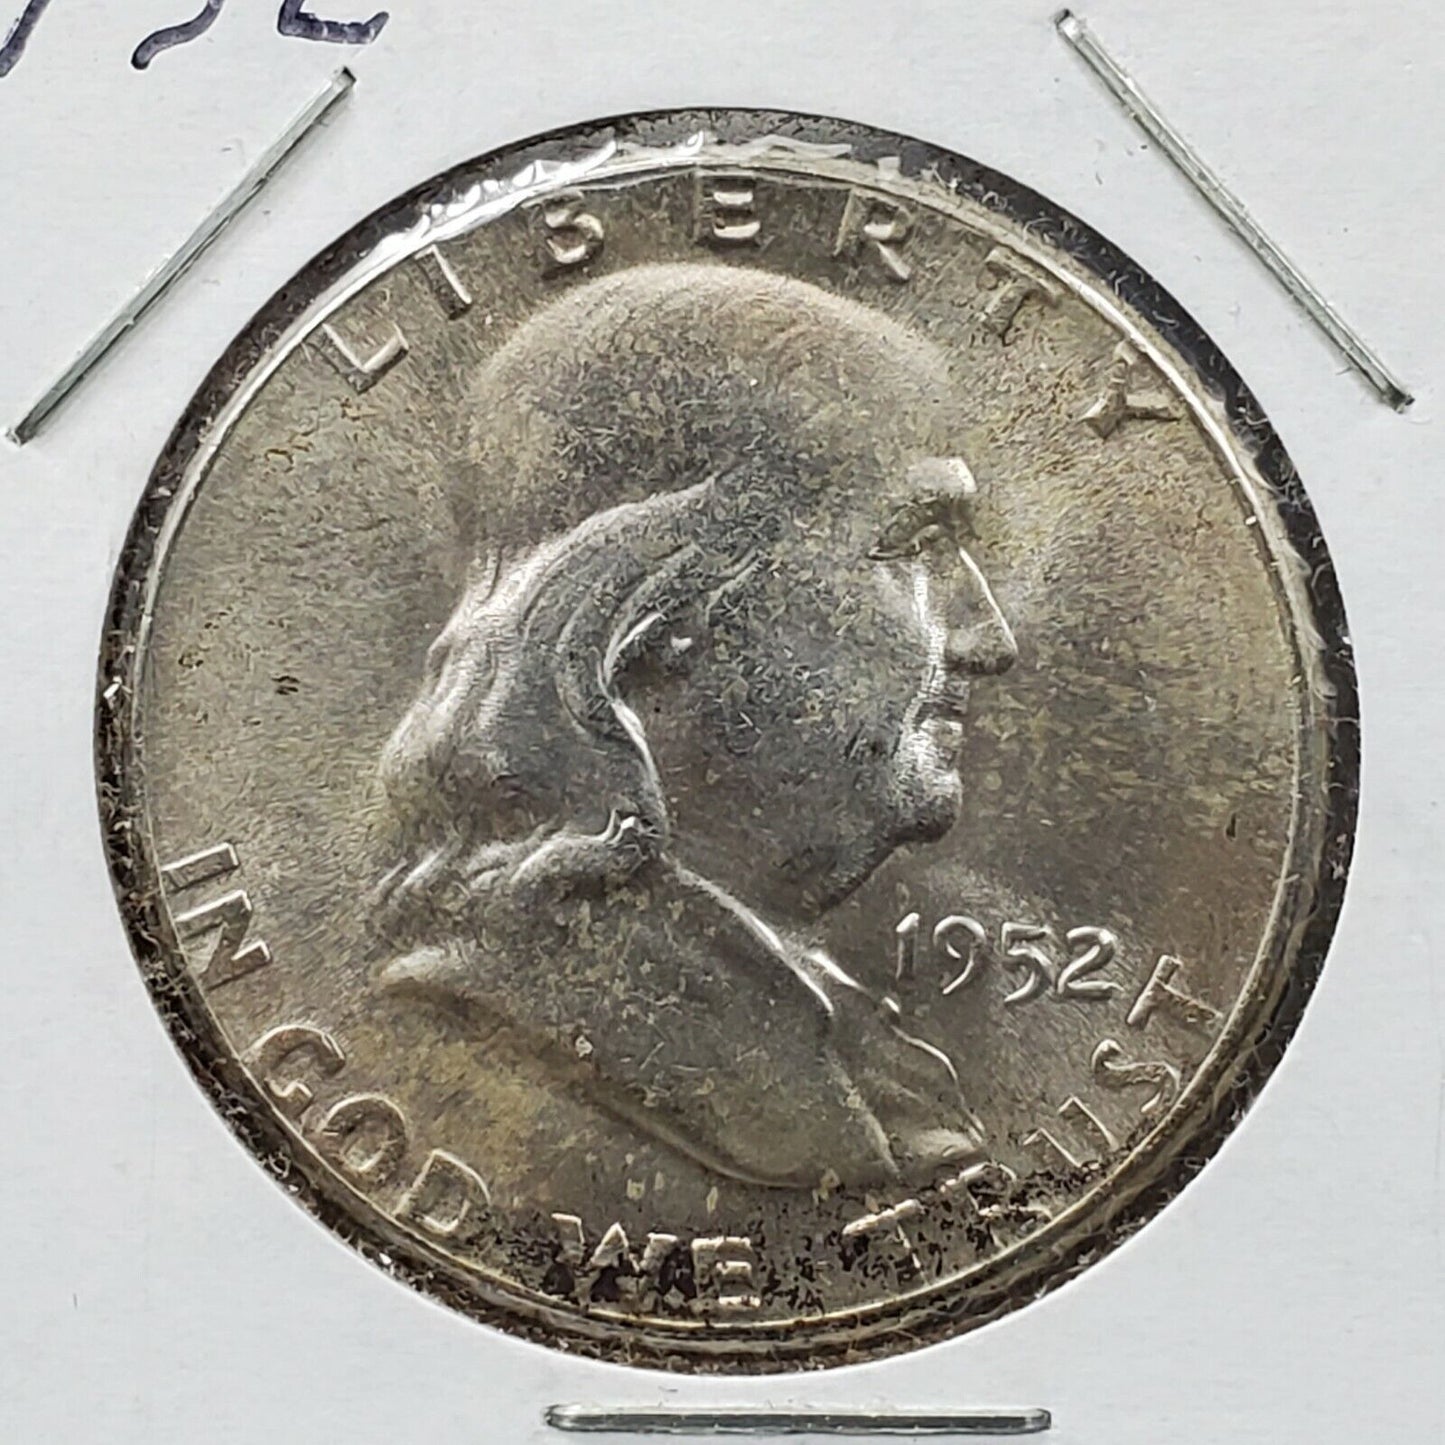 1952 P Franklin Silver Half Dollar Coin Average Uncirculated UNC Some Toning